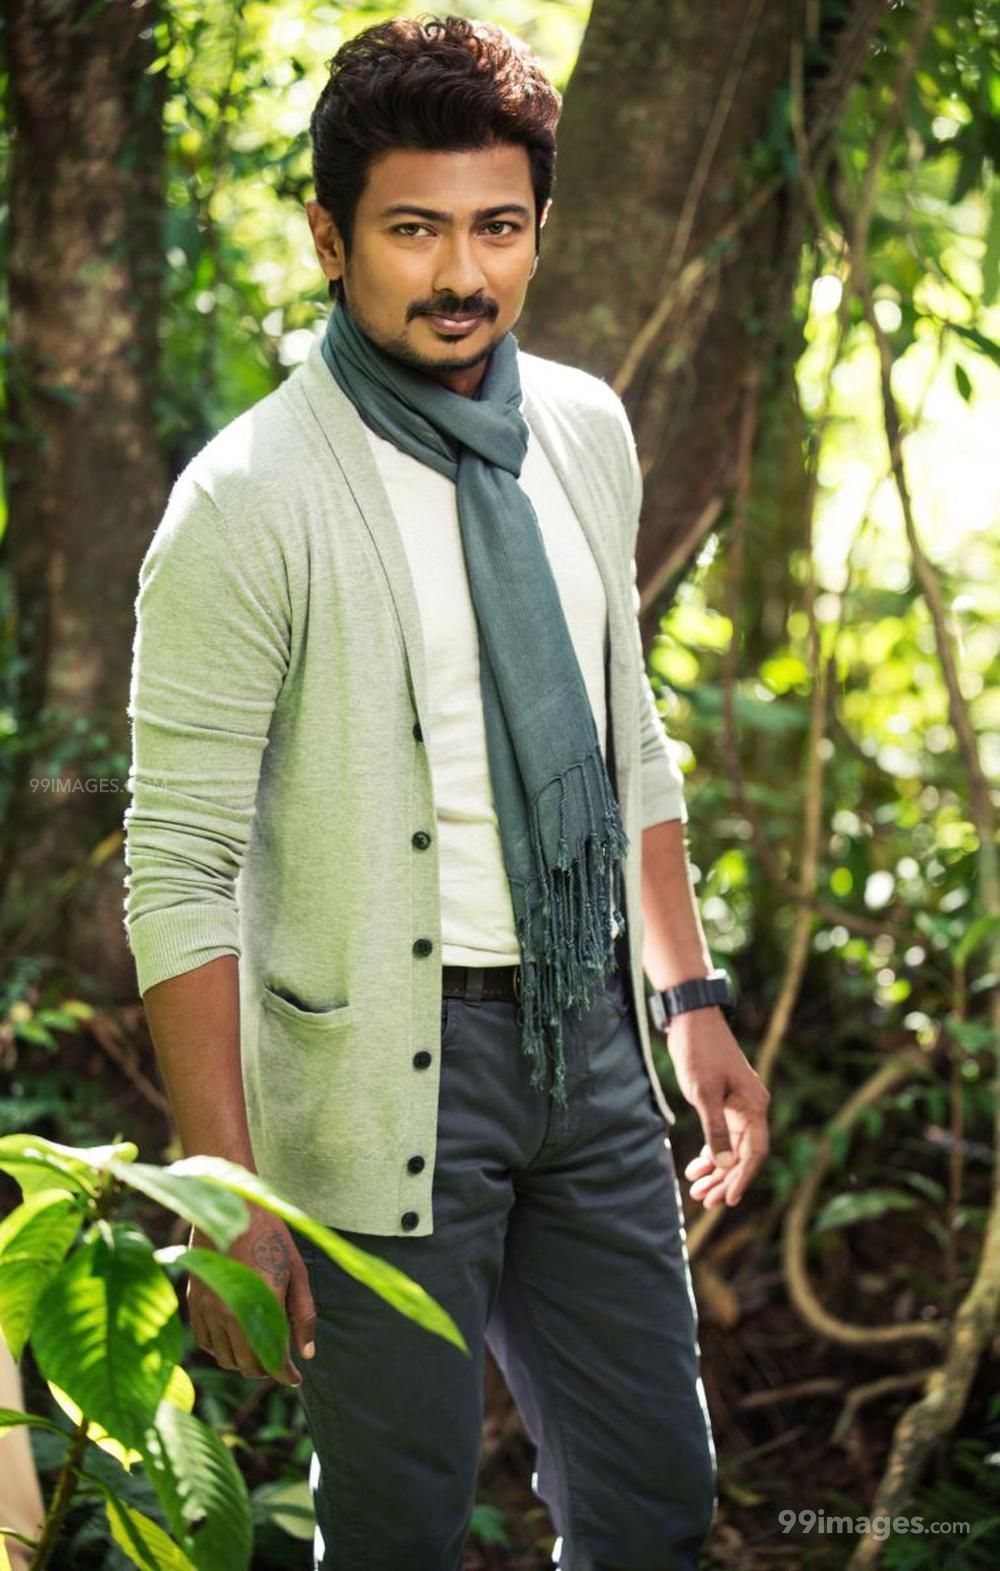 Udhayanidhi Stalin HD Wallpaper (Desktop Background / Android / iPhone) (1080p, 4k) (1000x1571) (2020)